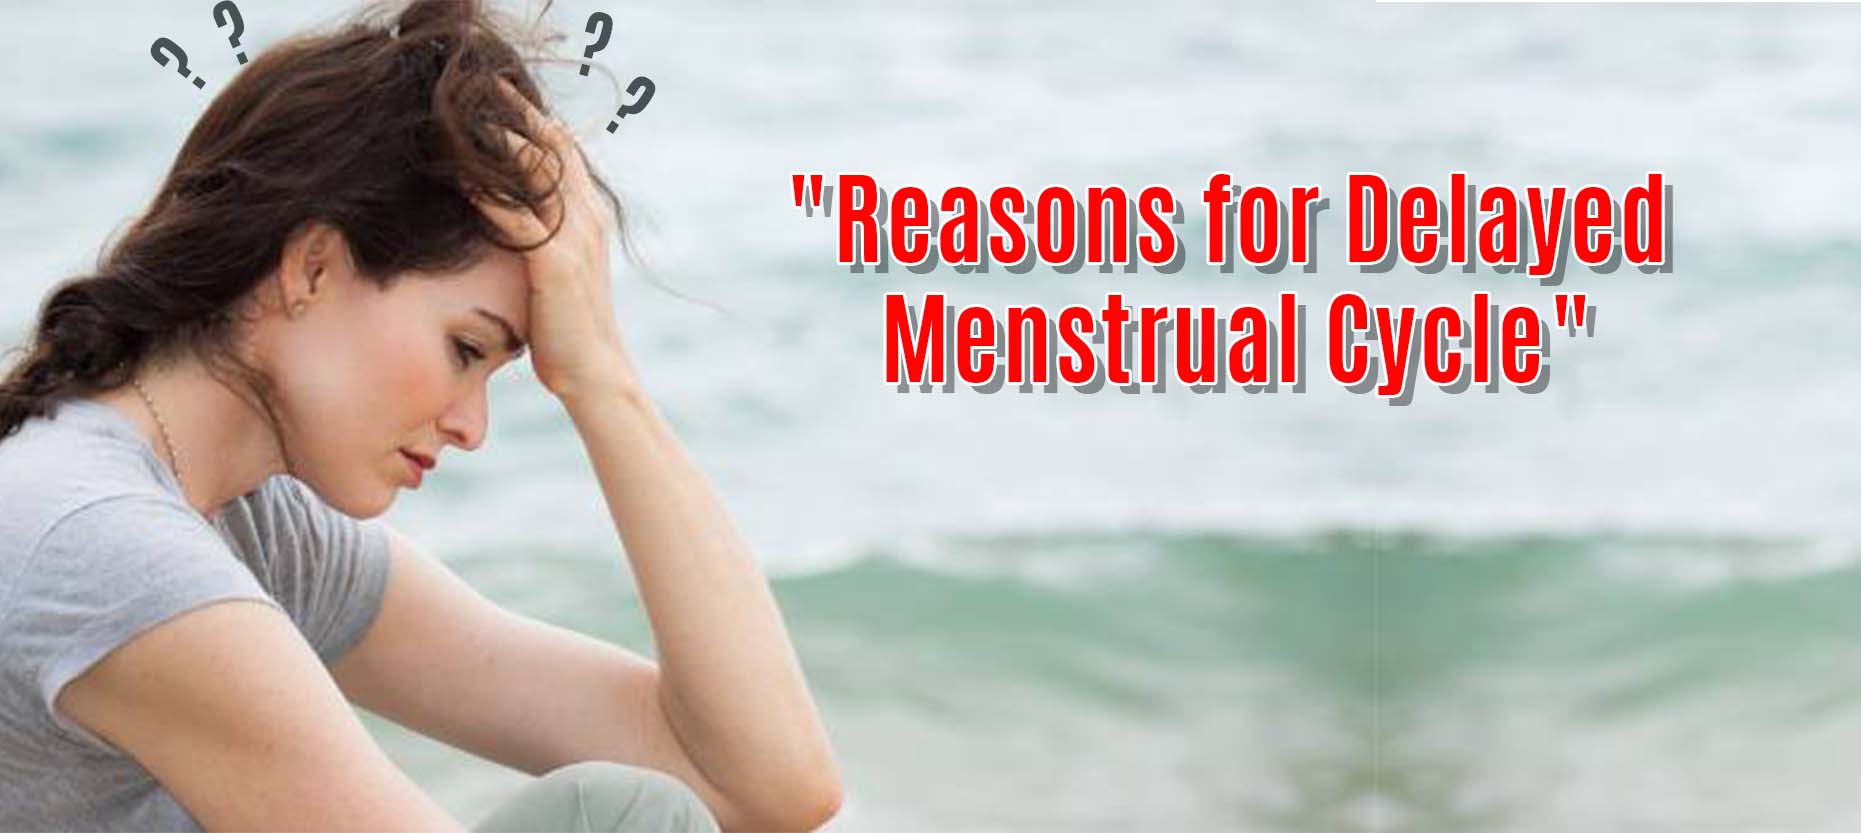 Reasons for Delayed Periods